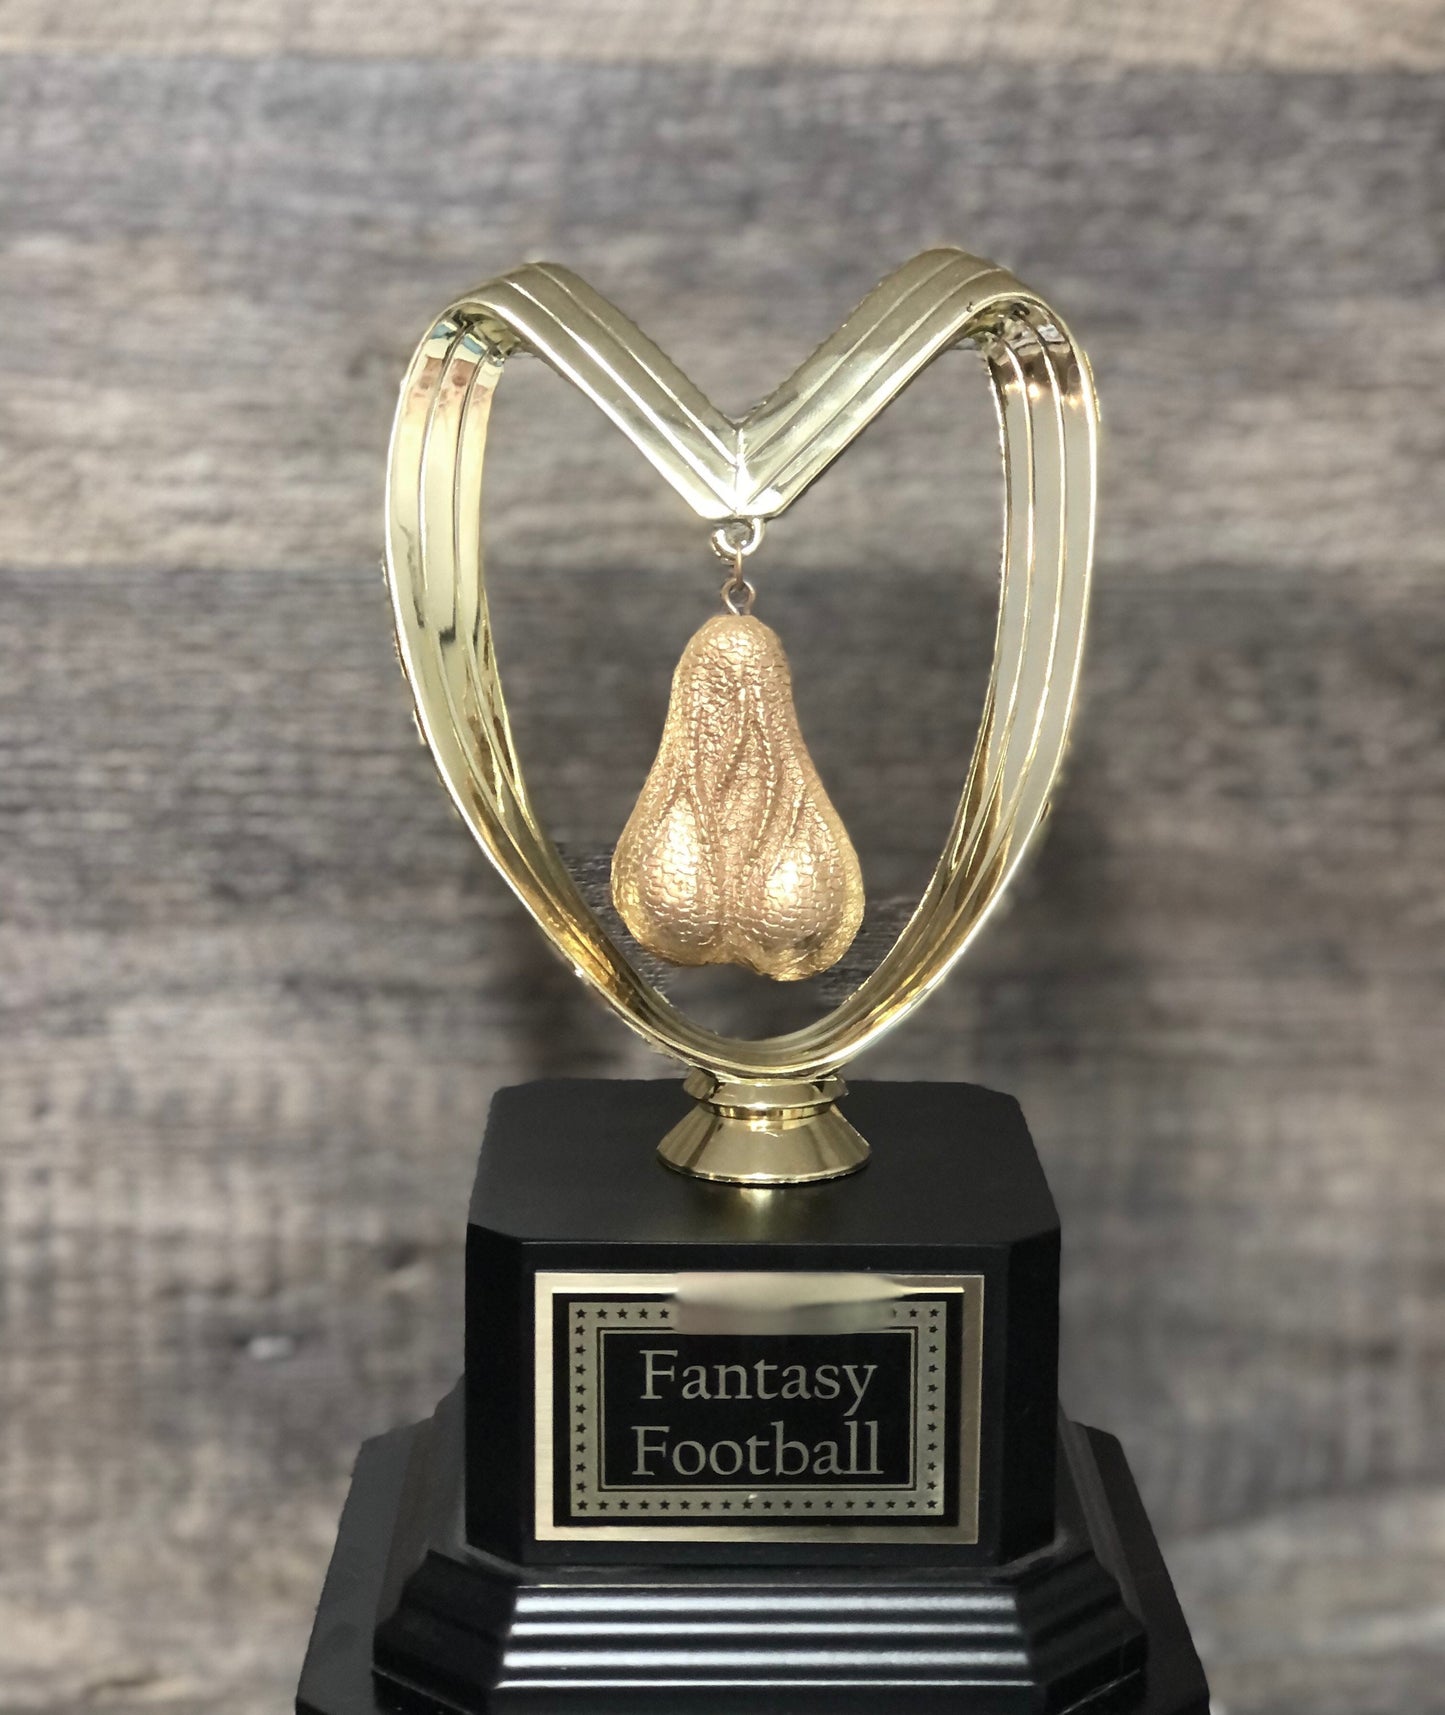 Soccer Trophy GOLDEN Balls Testicle Trophy Loser Perpetual You Suck Last Place You've Got Balls Funny Trophy Adult Humor Guy's Weekend